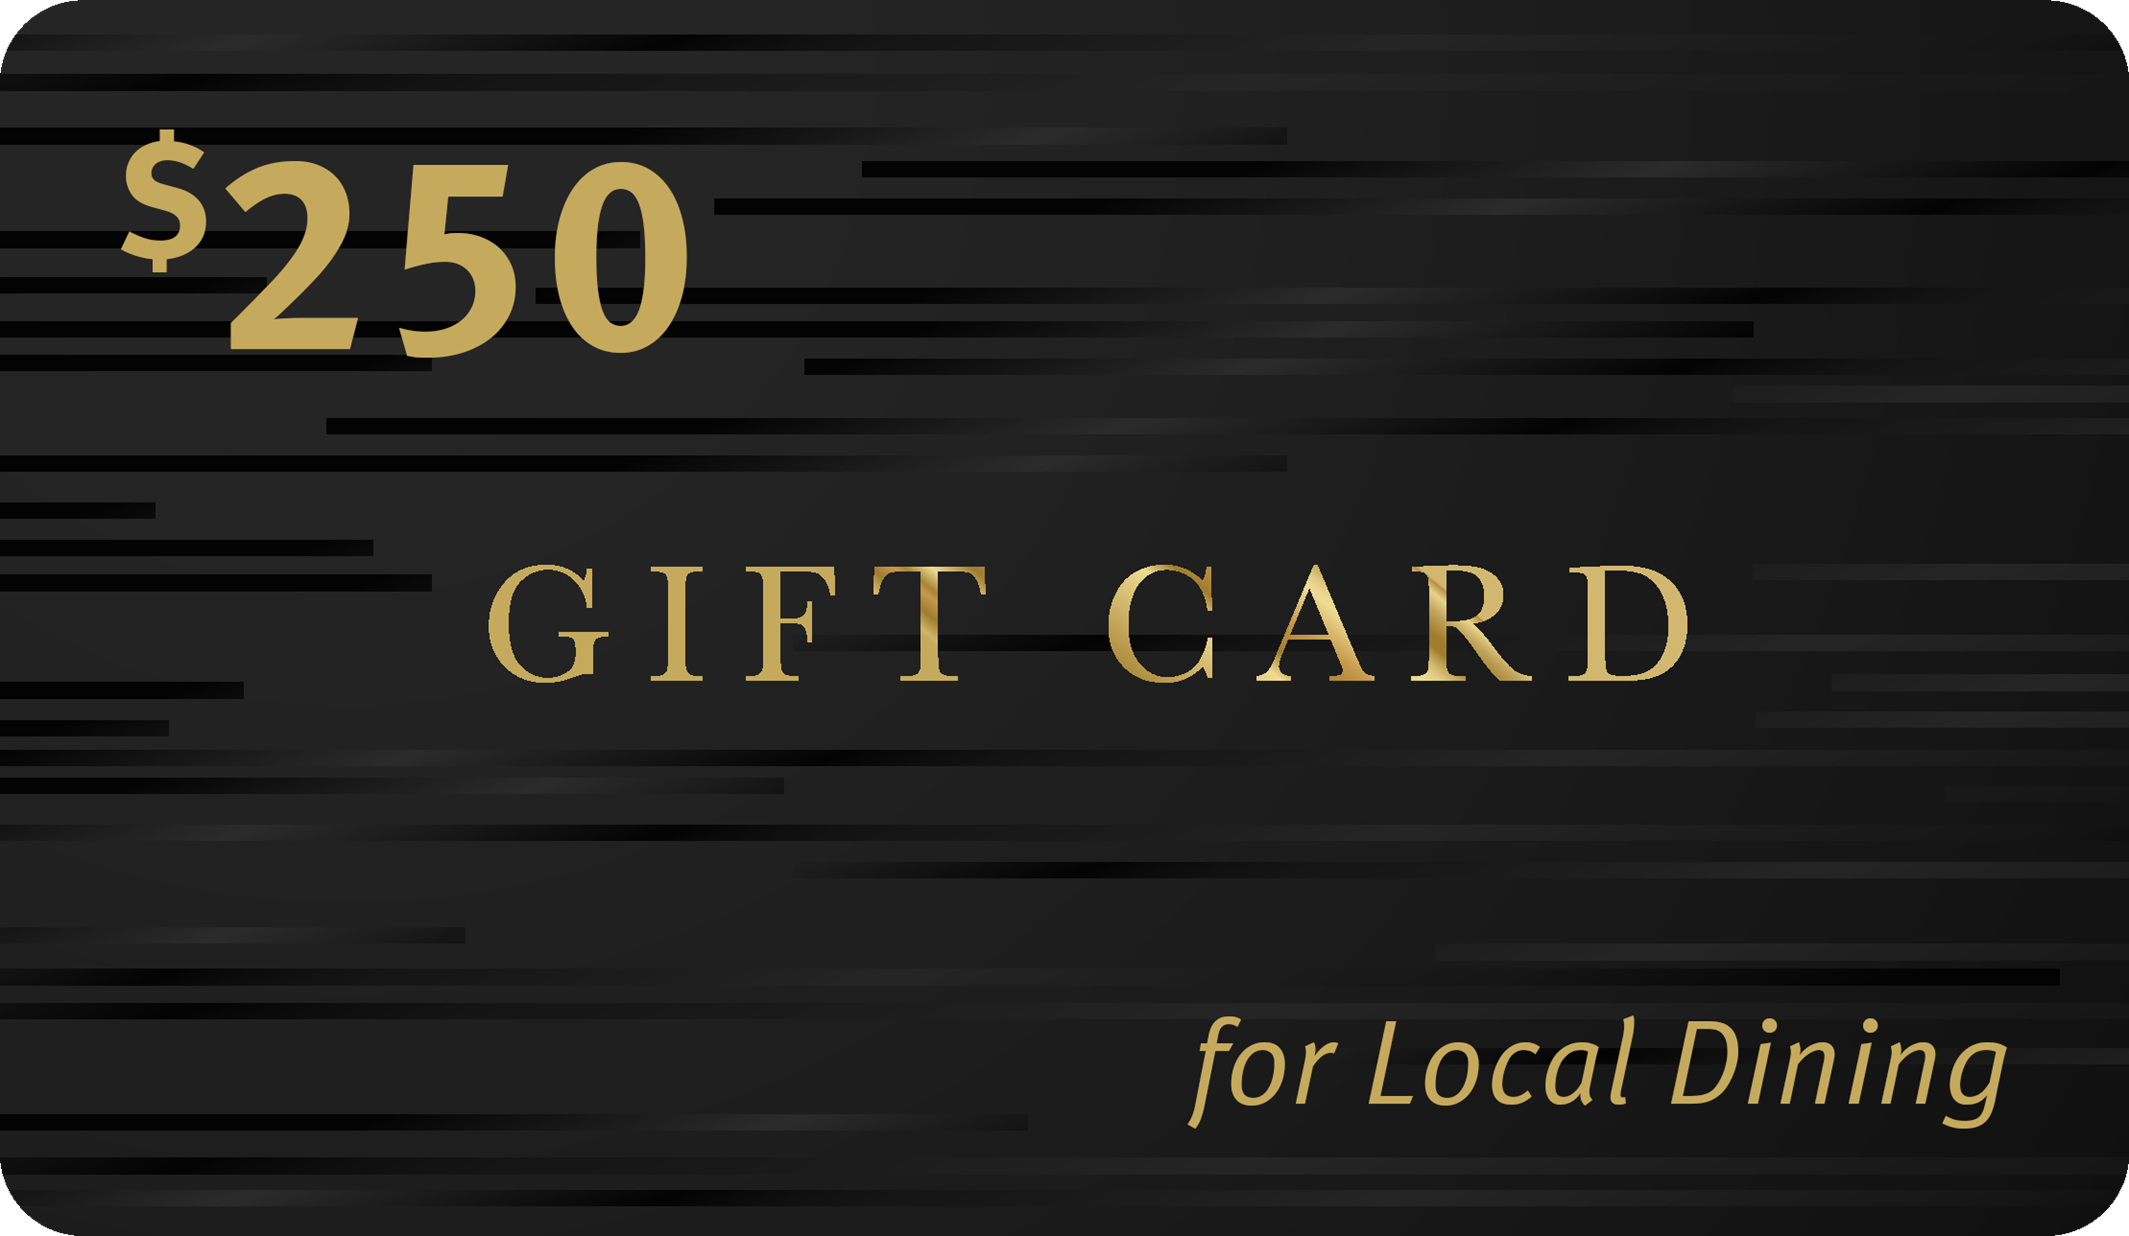 local eatery gift card